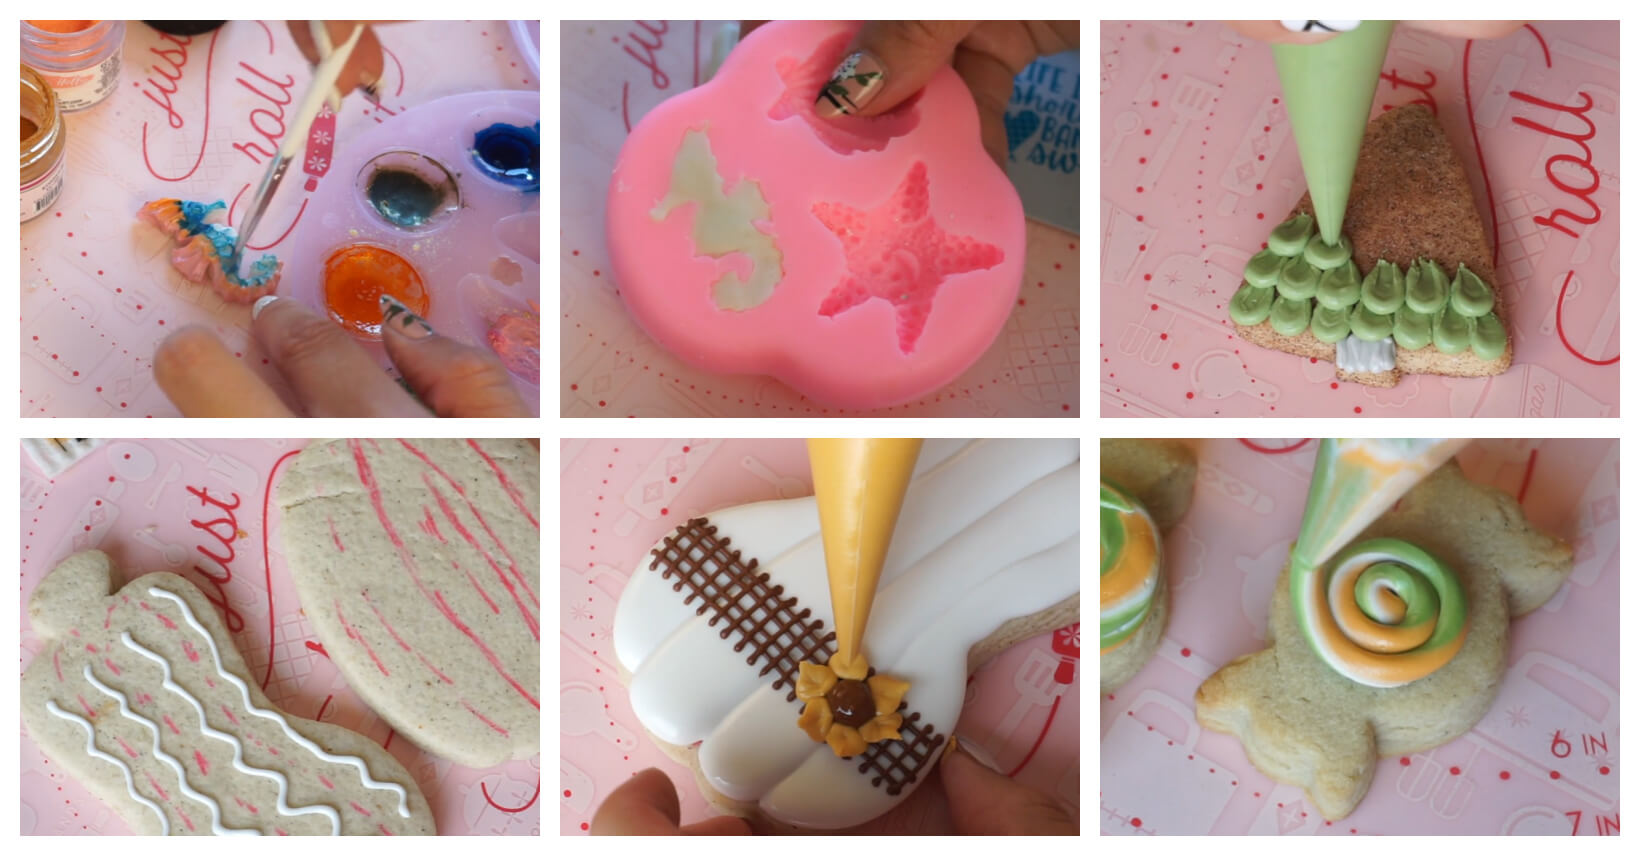 Decorated Cookies from Baking to Packaging